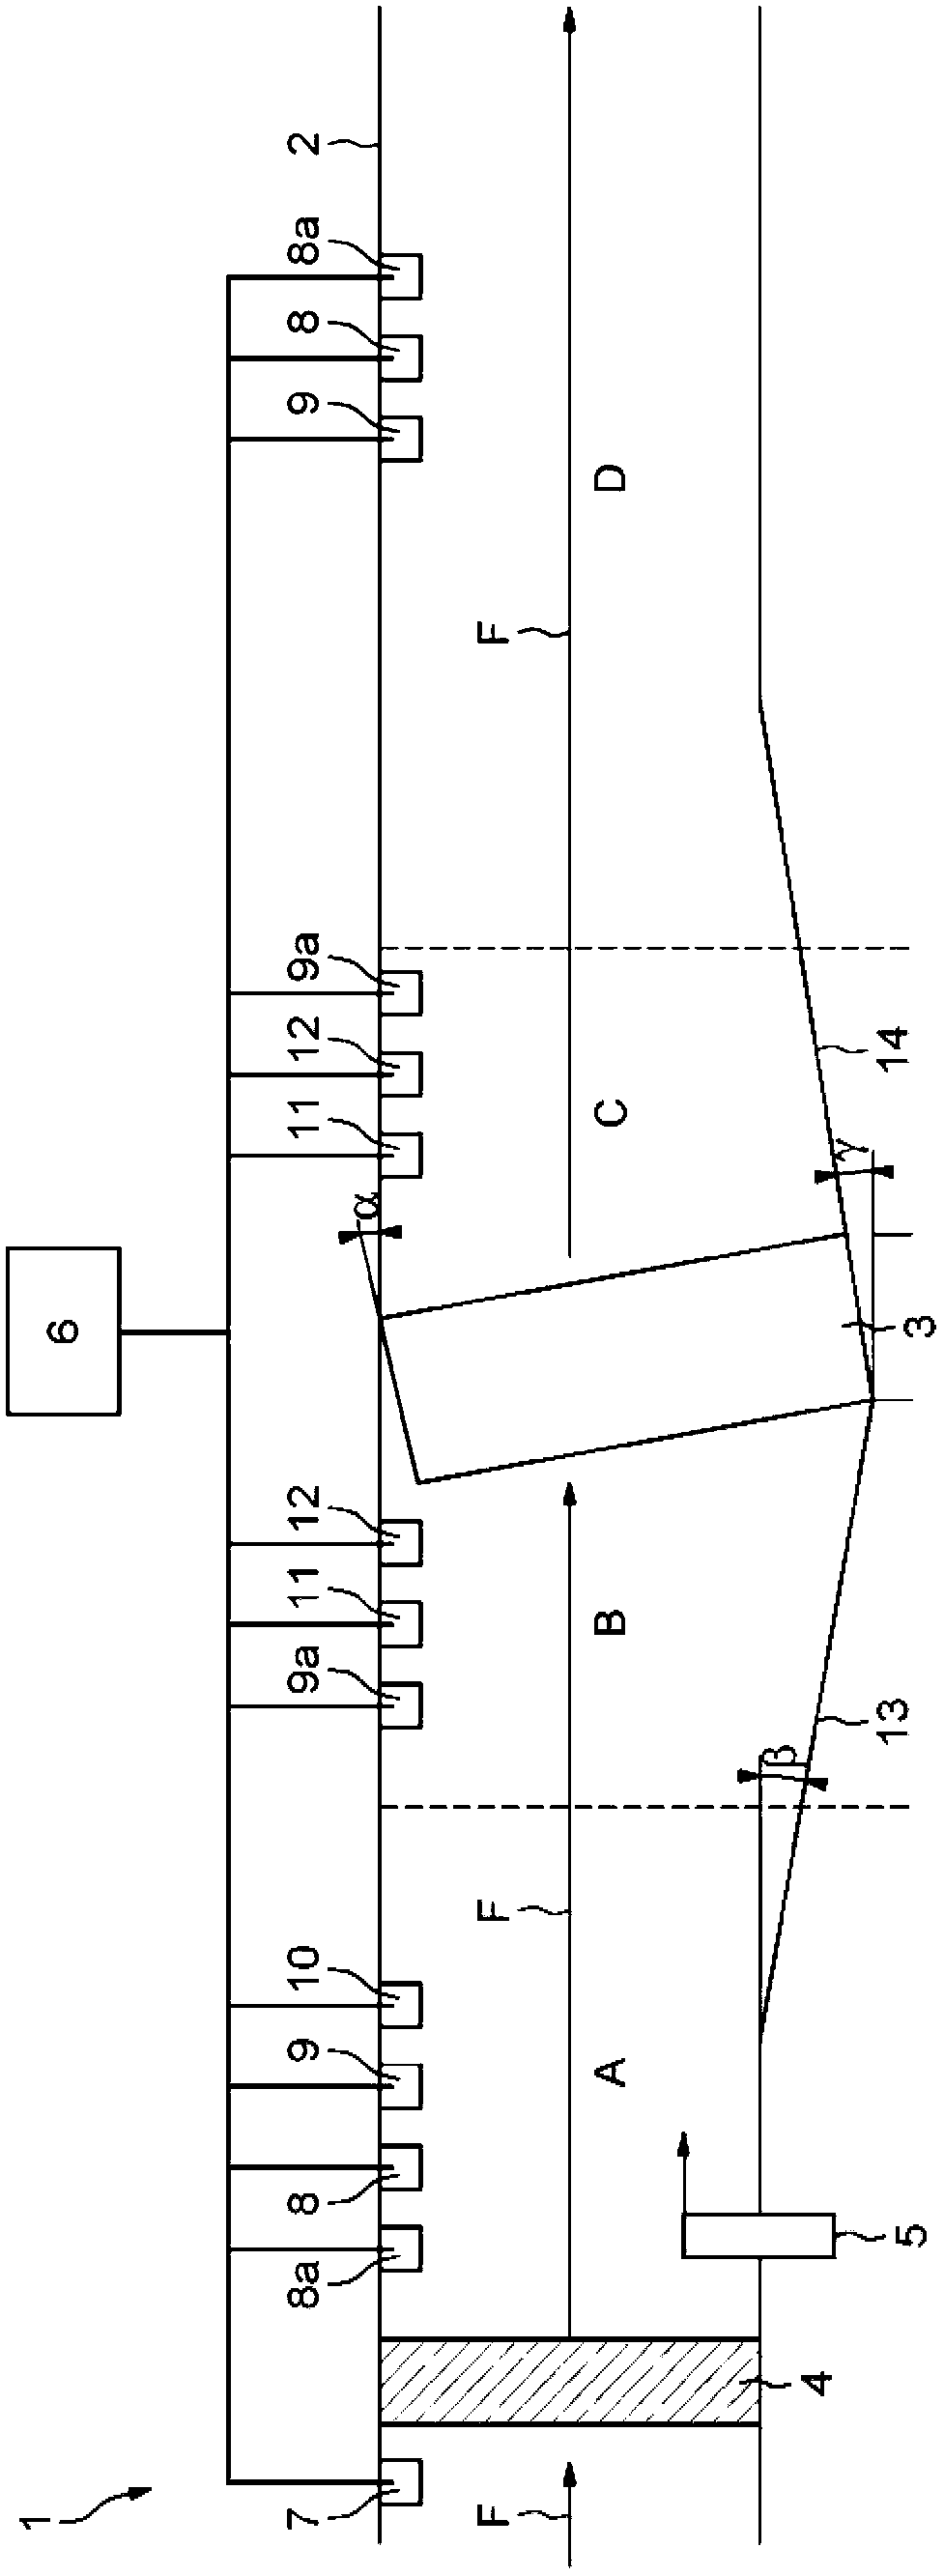 Method and system for controlling a filter